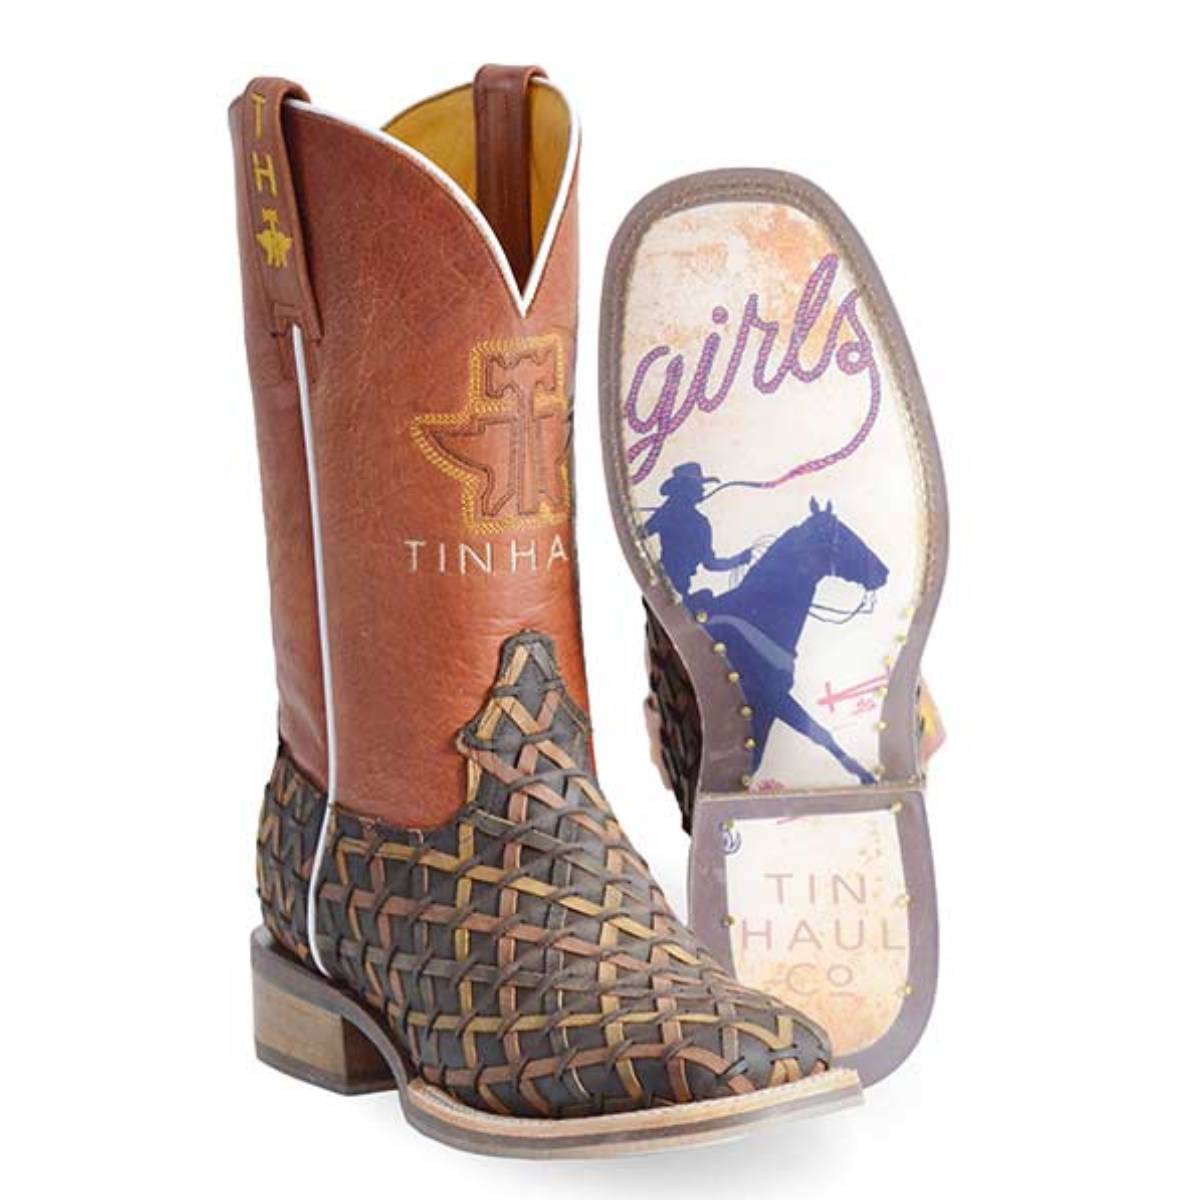 Women's Tin Haul Weaving Time Long Live Cowgirls Sole Boots Handcrafted Brown - yeehawcowboy